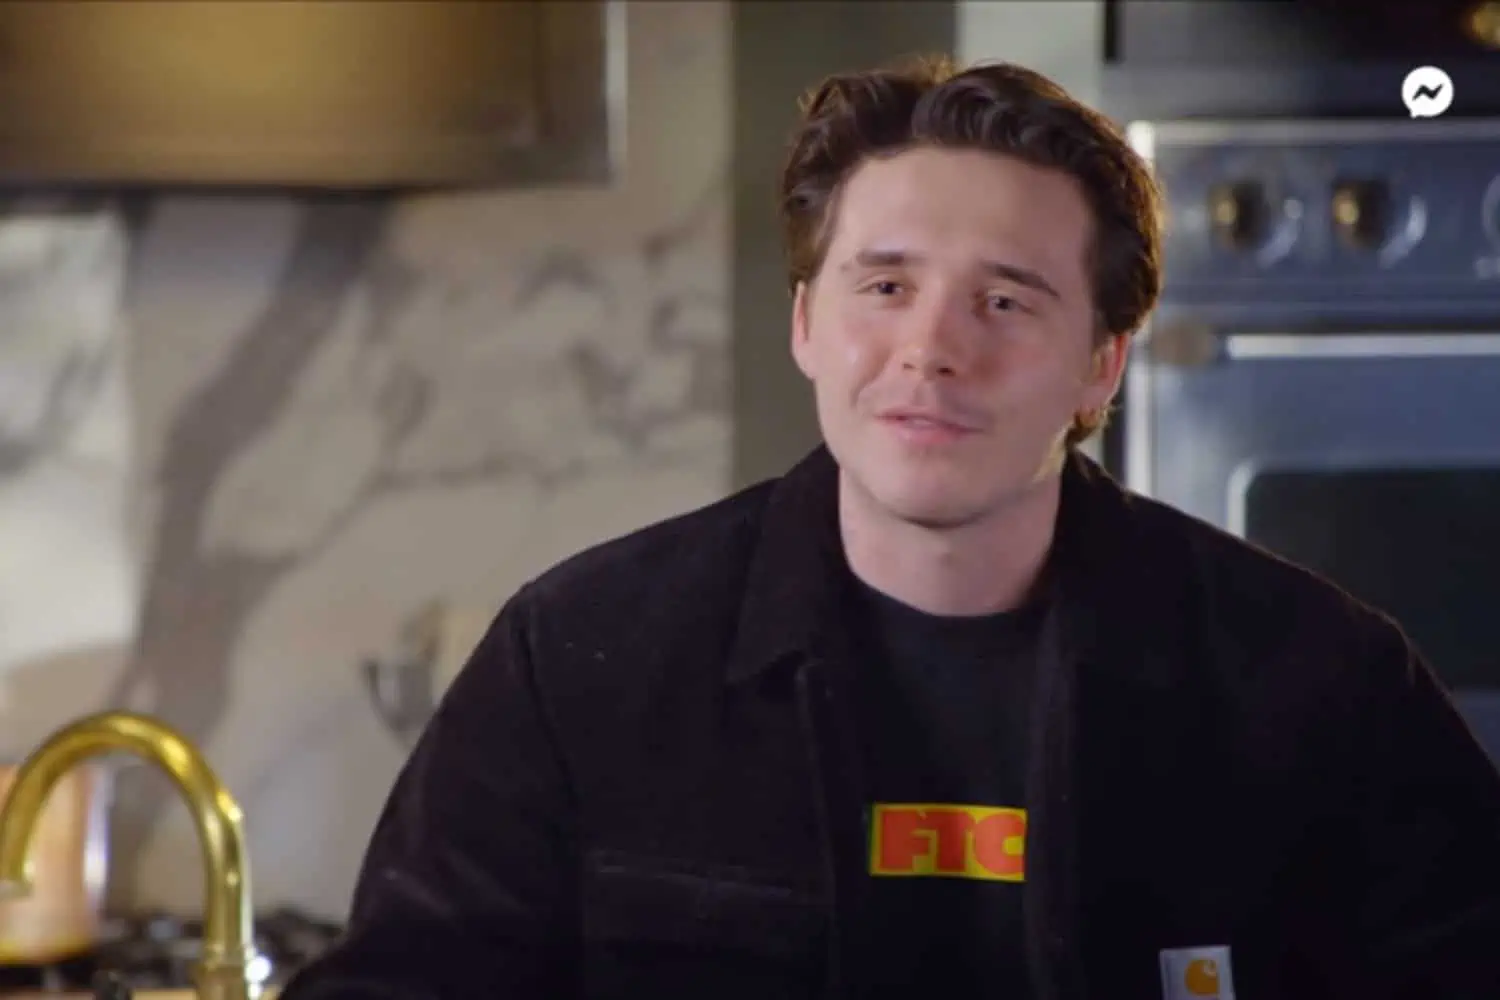 Brooklyn Beckham's 8-minute cooking video costs $100 000 per episode